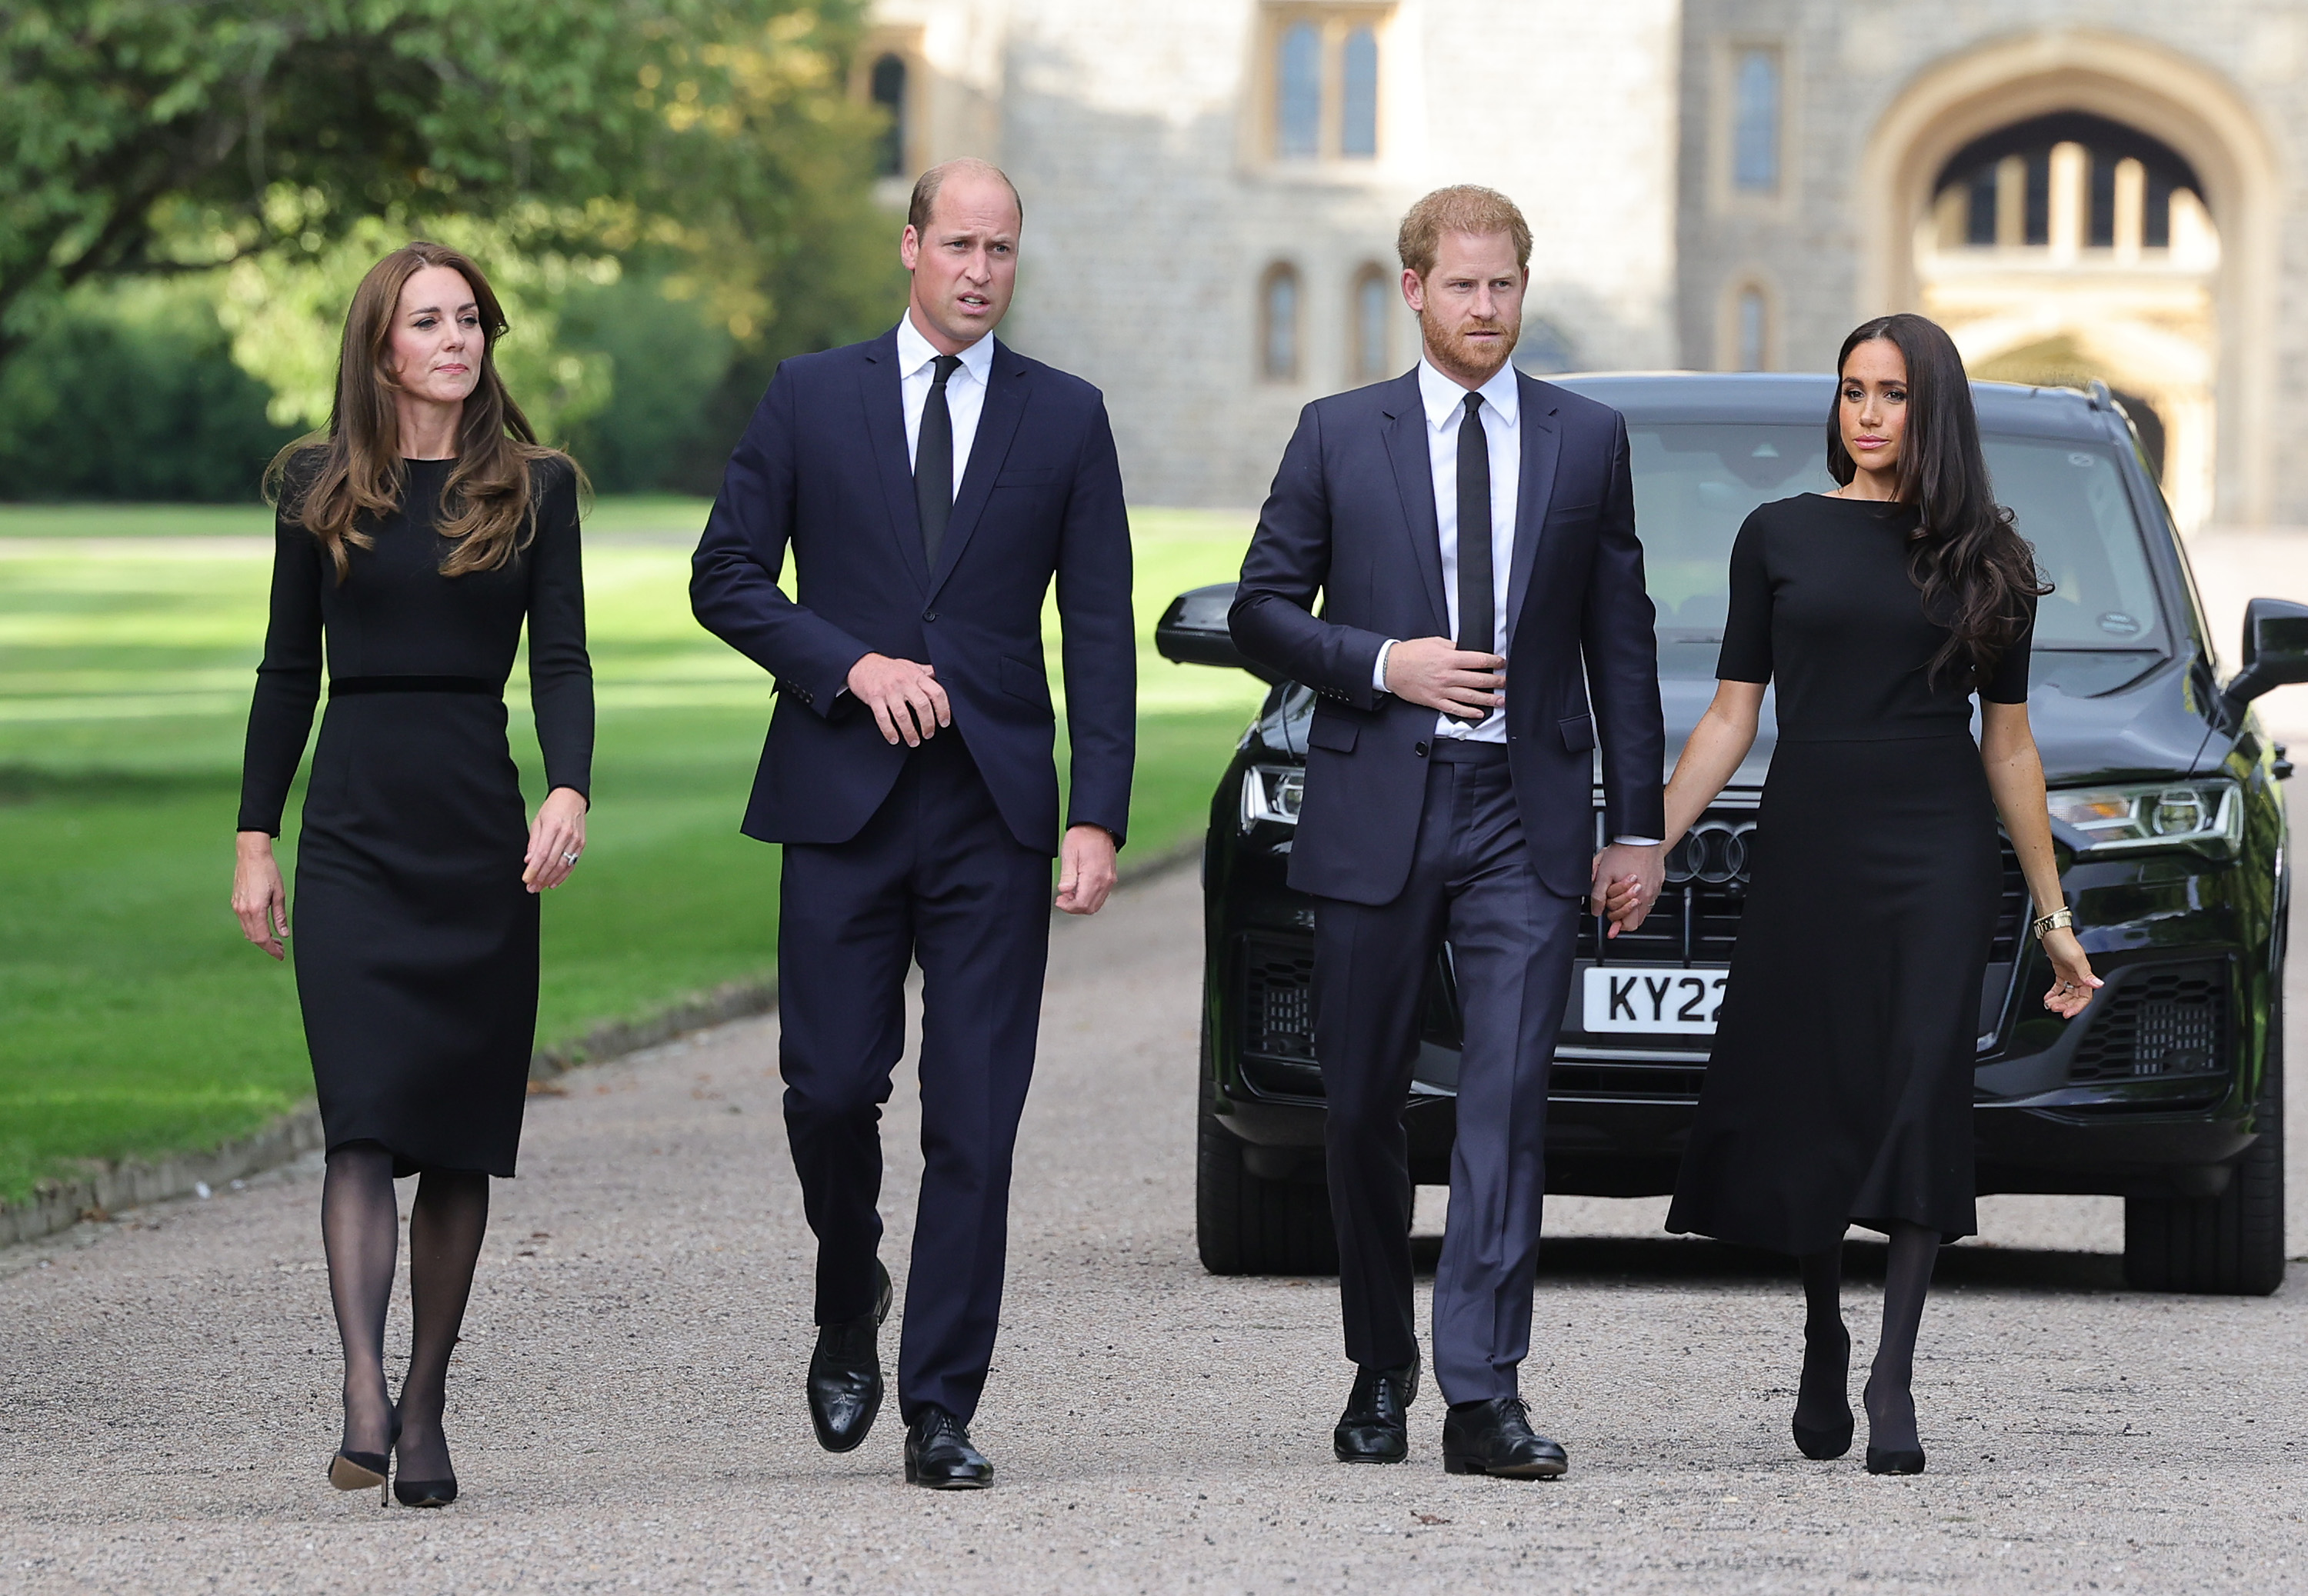 Princess Catherine, Prince William, Prince Harry, and Meghan Markle during the Walk at Windsor Castle arrive to view flowers and tributes to HM Queen Elizabeth on September 10, 2022 in Windsor, England | Source: Getty Images